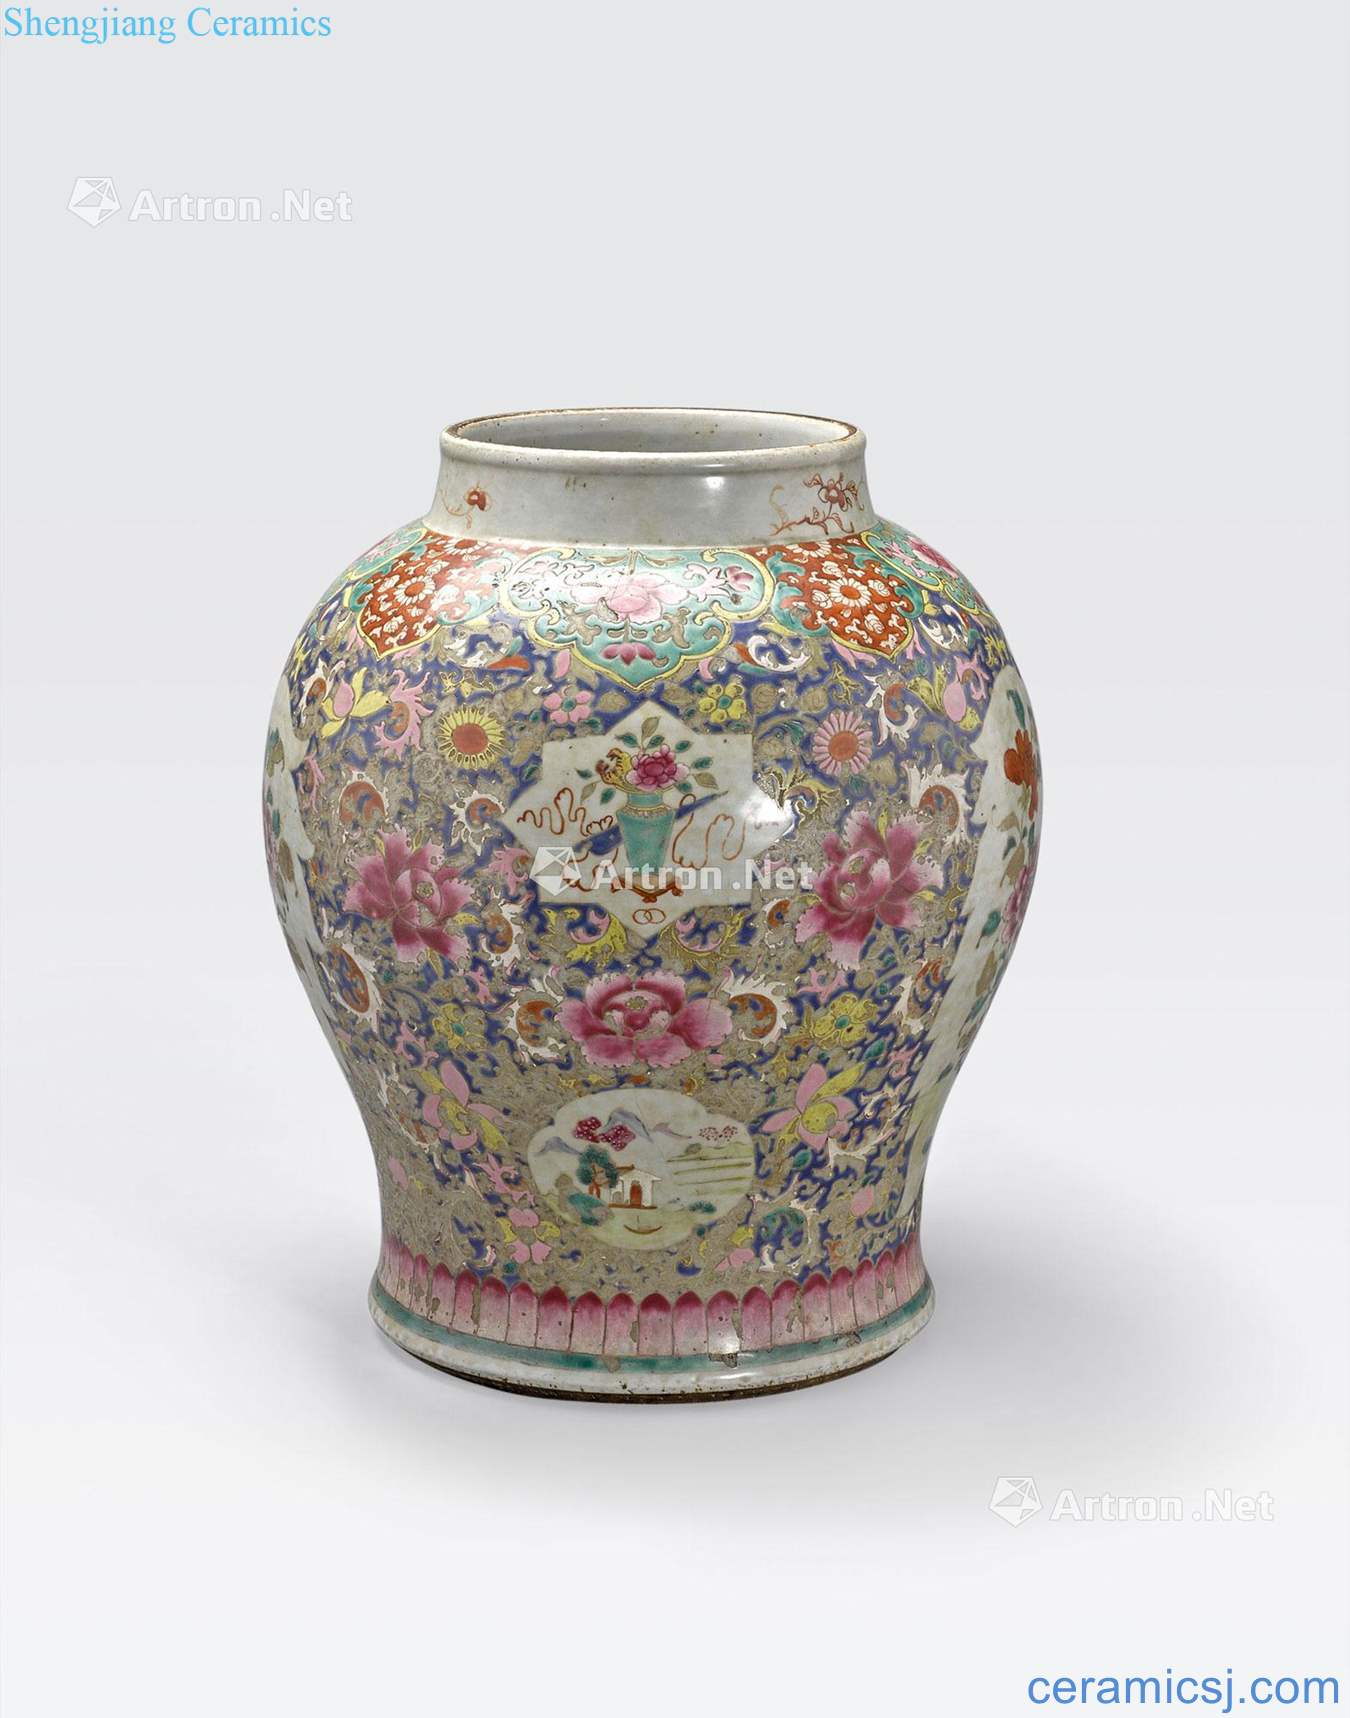 The 19 th century A FAMILLE ROSE ENAMELED GINGER JAR